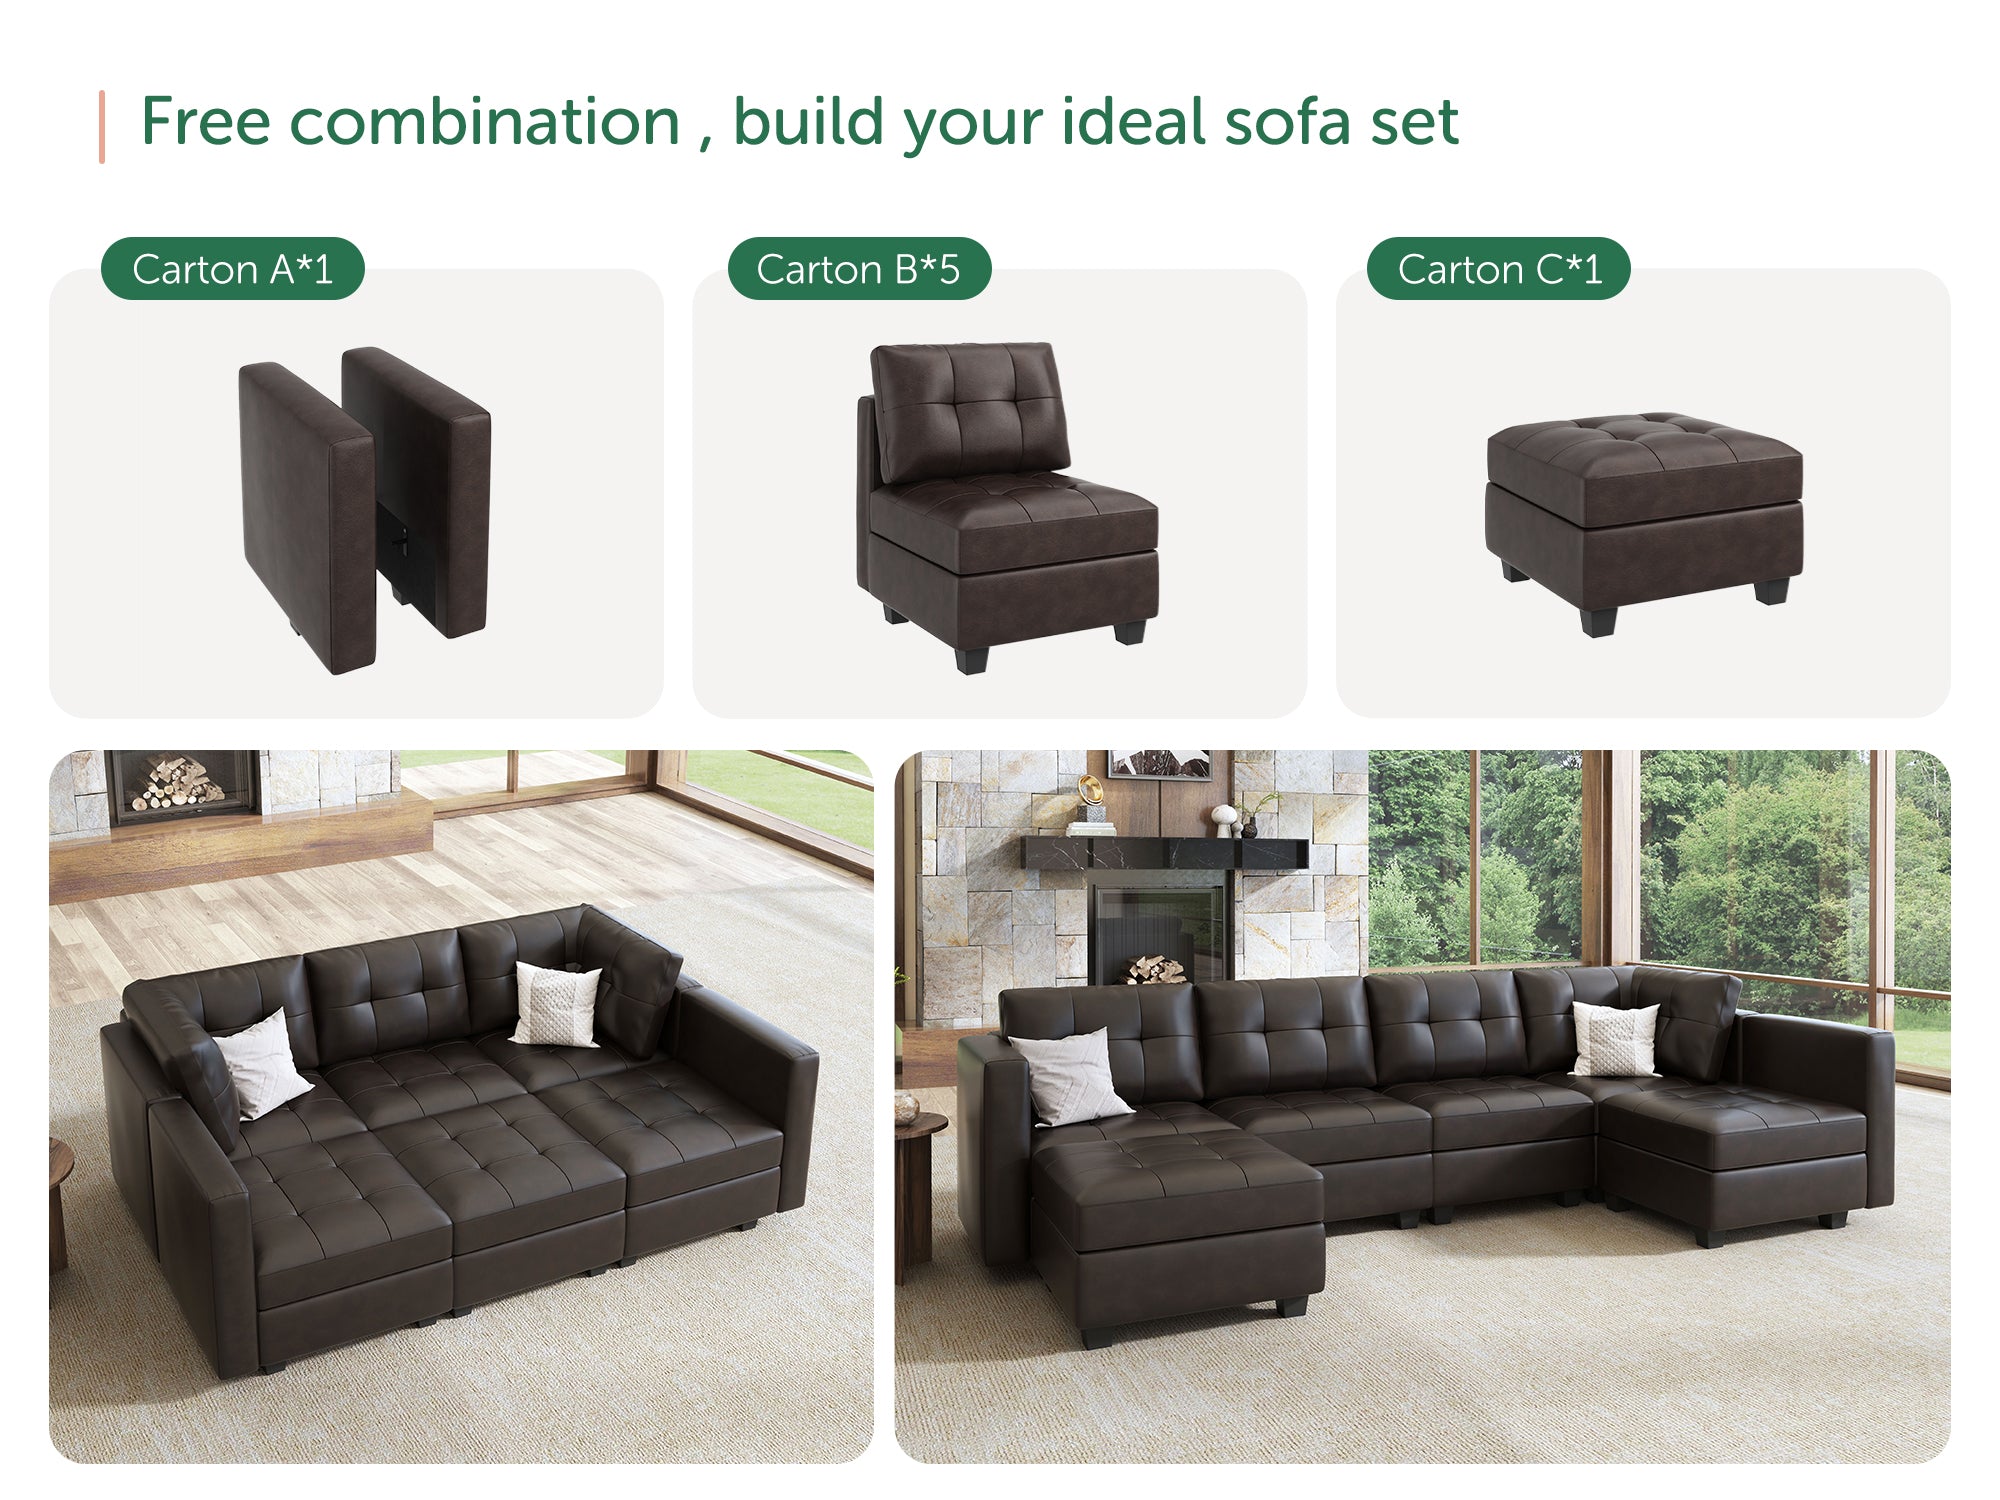 HONBAY 6-Piece Faux Leather Modular Sleeper Sectional With Storage Seat